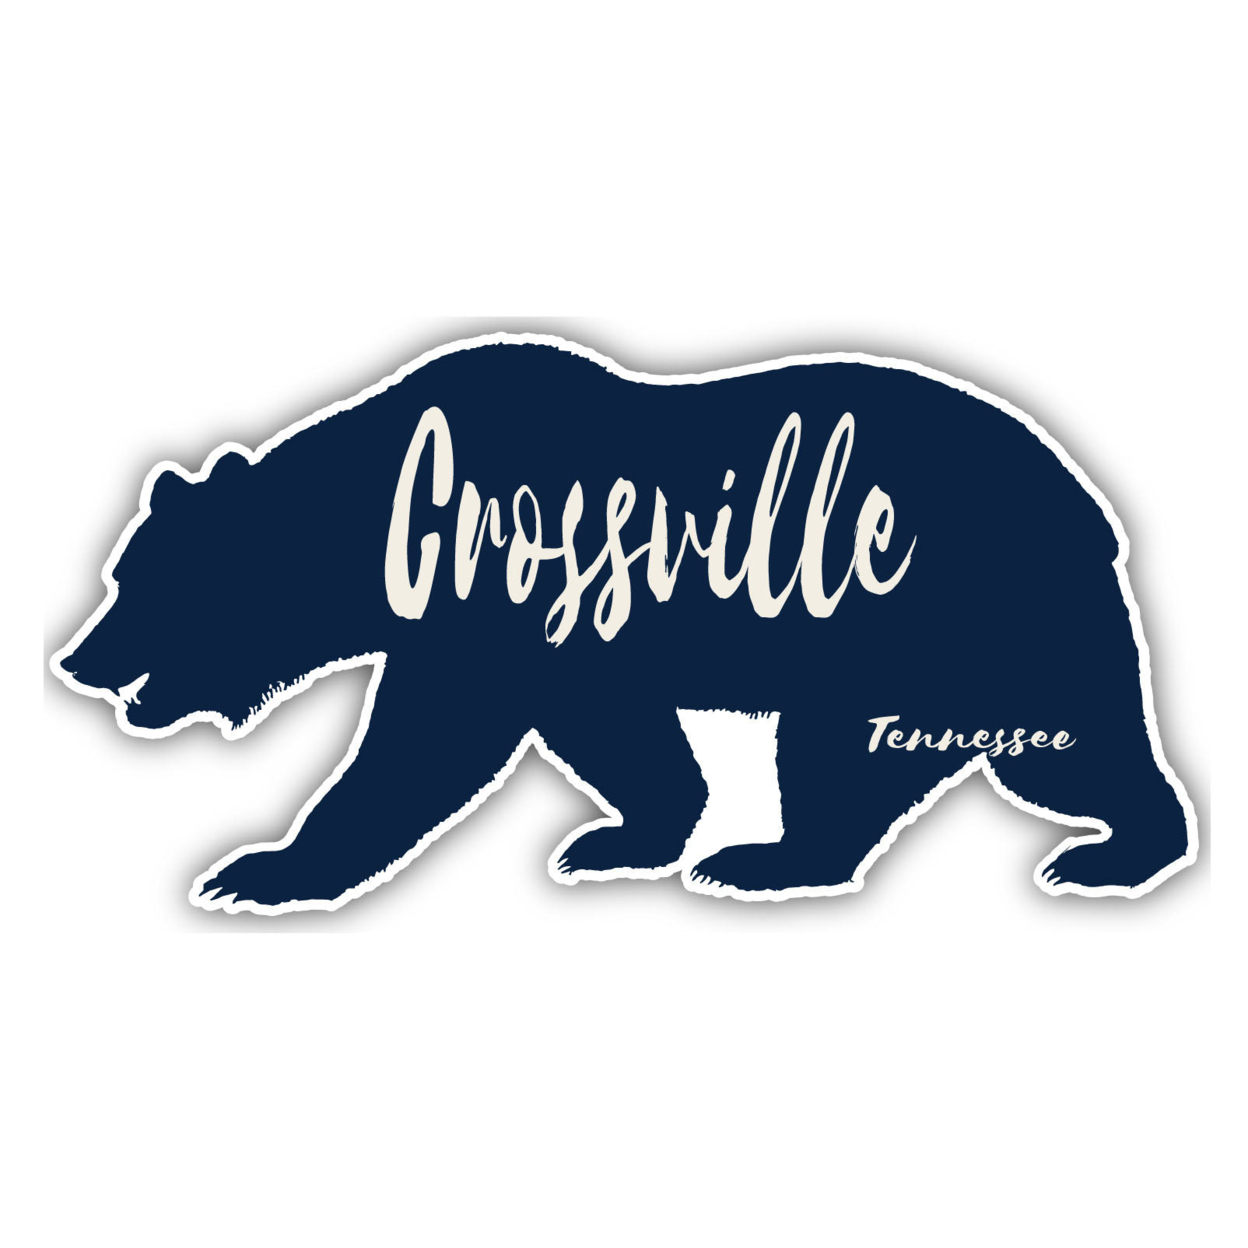 Crossville Tennessee Souvenir Decorative Stickers (Choose Theme And Size) - Single Unit, 10-Inch, Tent